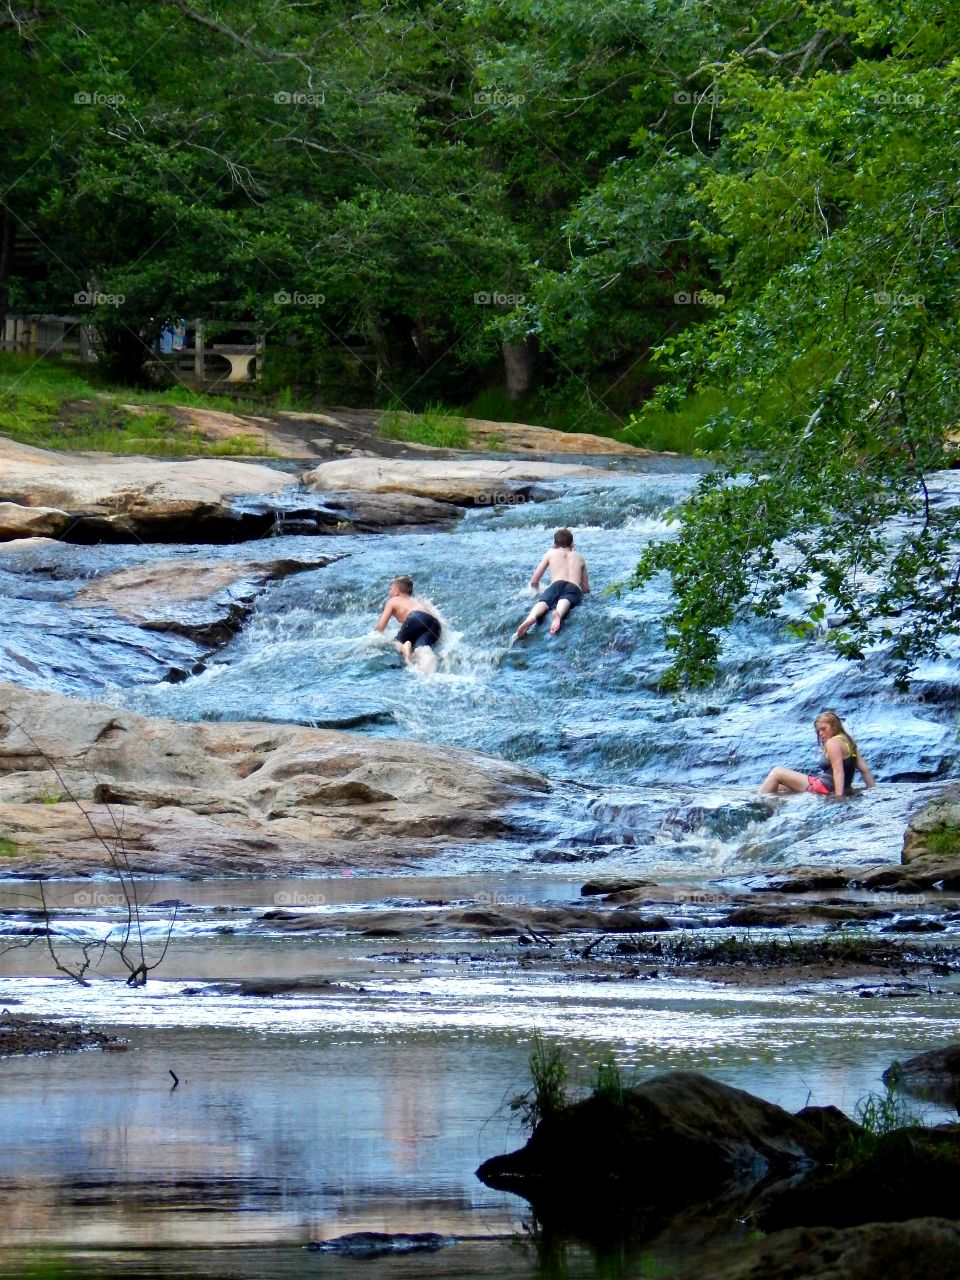 Cooling off from the summer heat at Victoria Bryant state park in Georgia